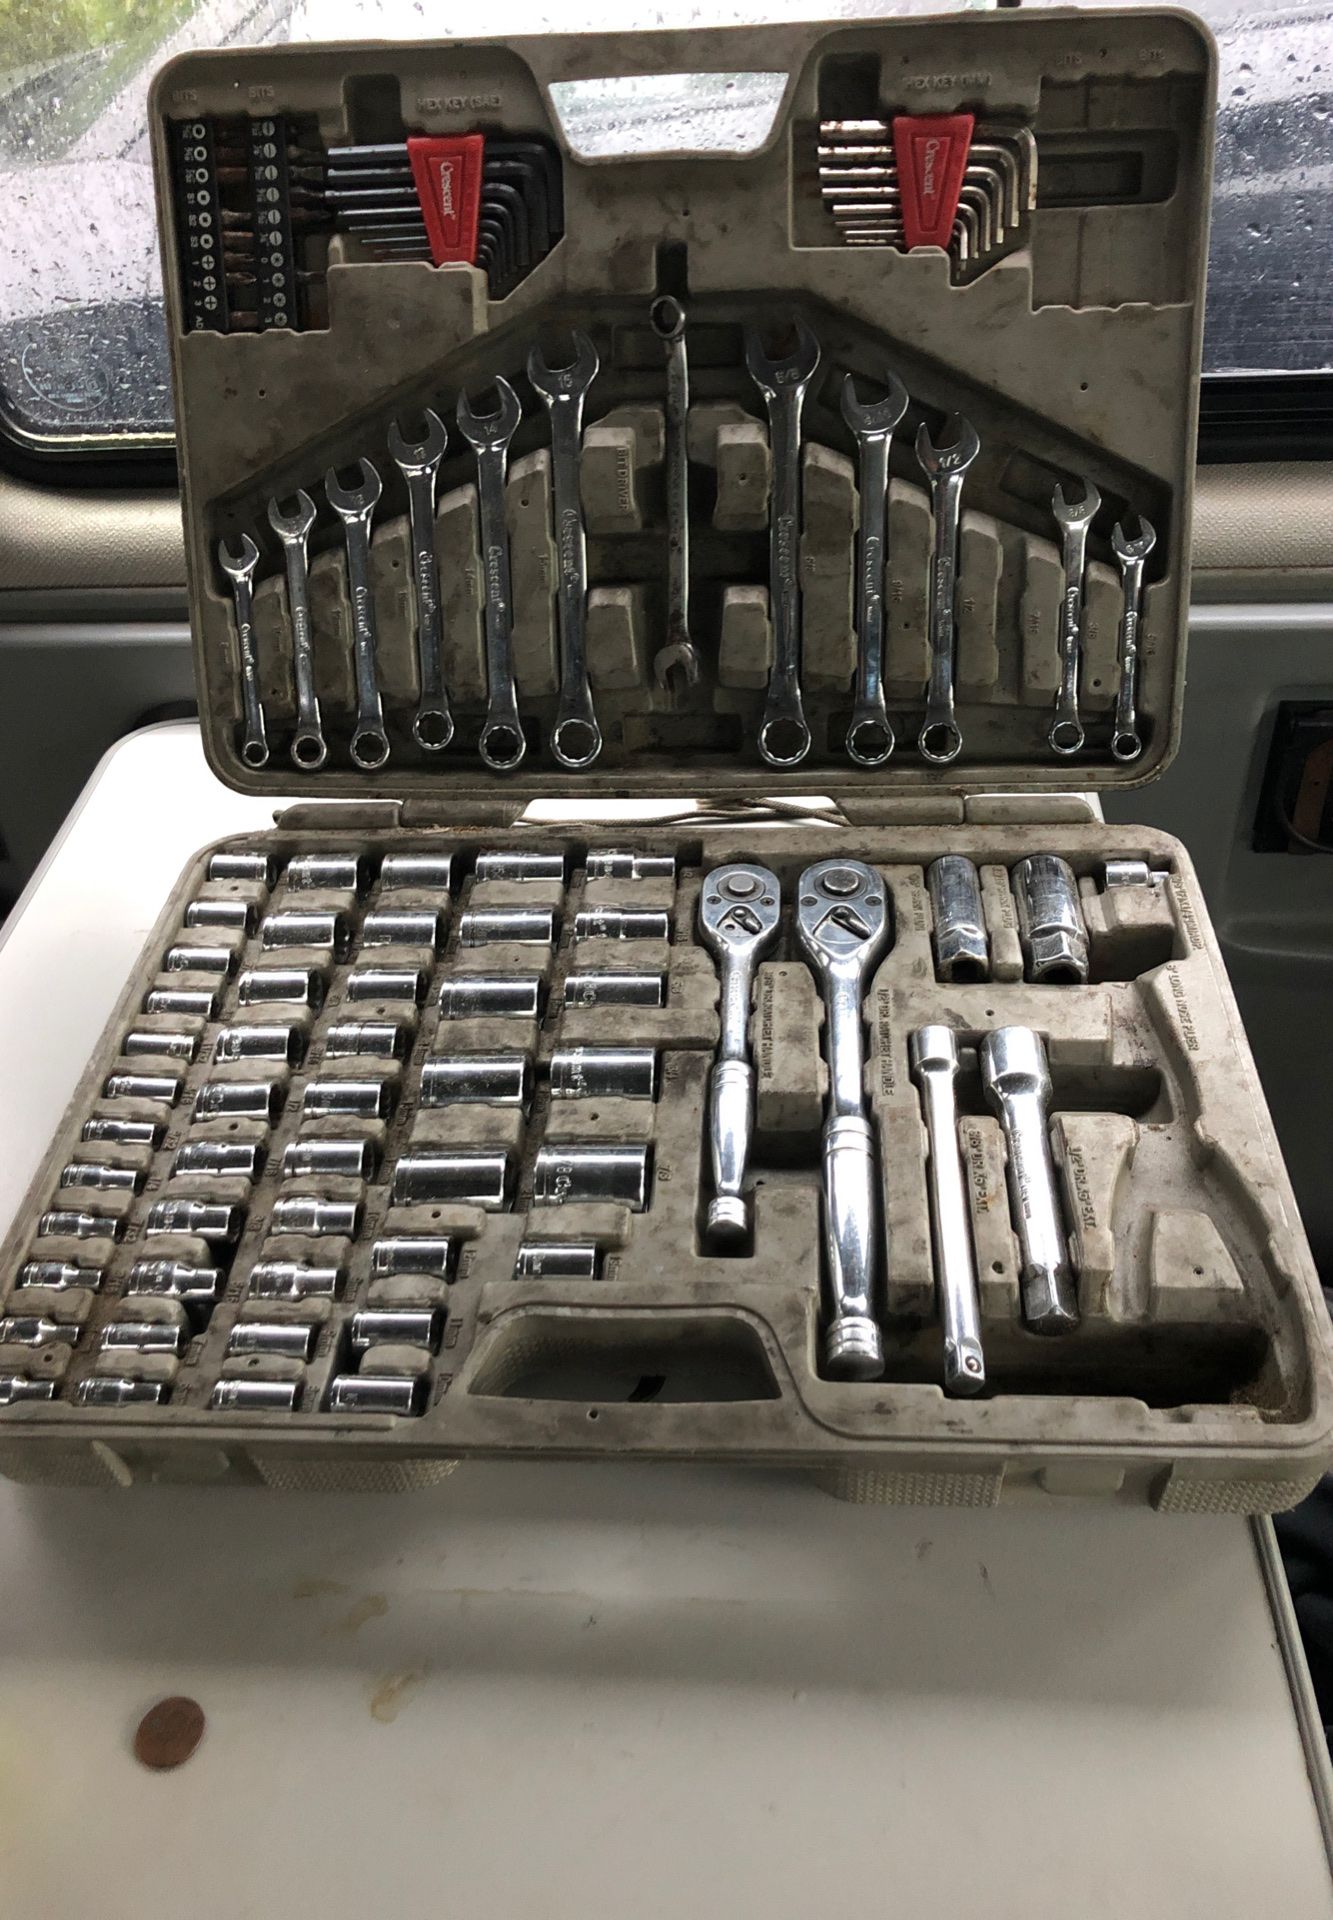 Crescent socket and wrench set